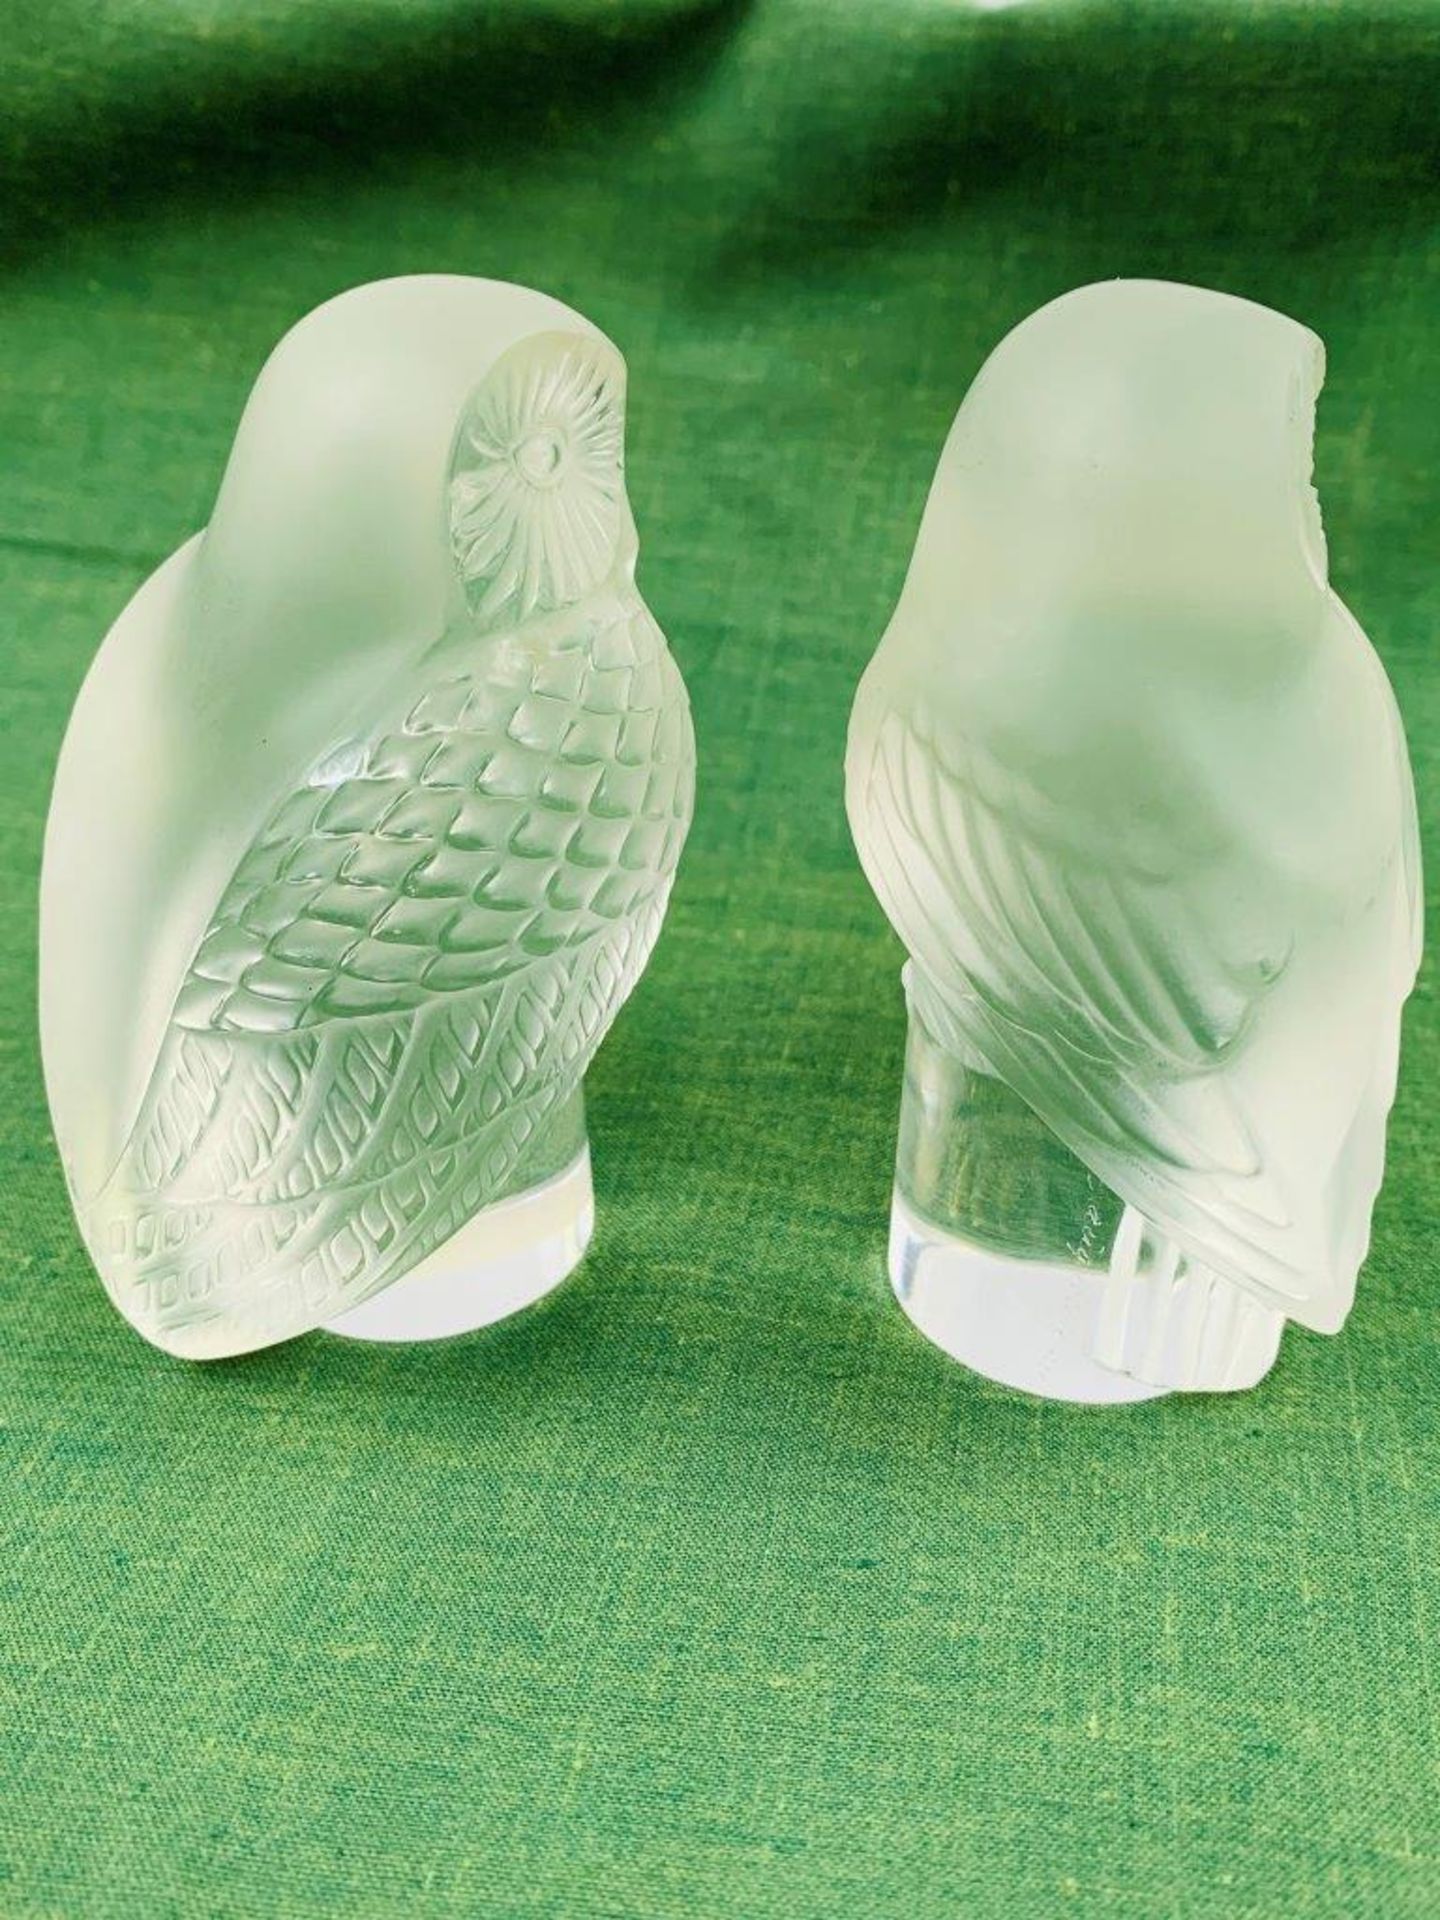 Two Lalique glass figurines of a perched owl - Image 3 of 4